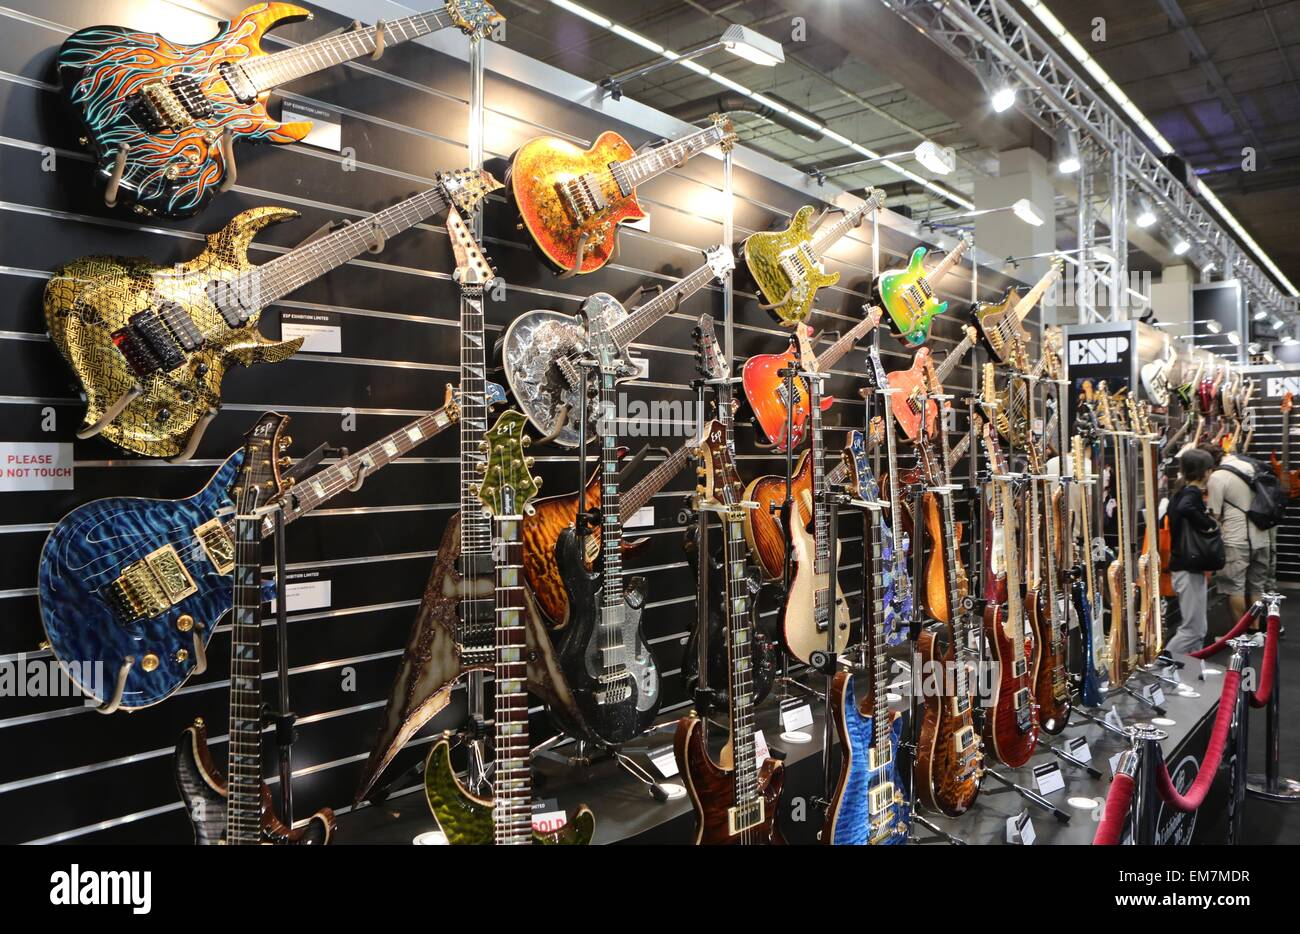 A collection of ESP guitars on display at the Muskikmesse music ...